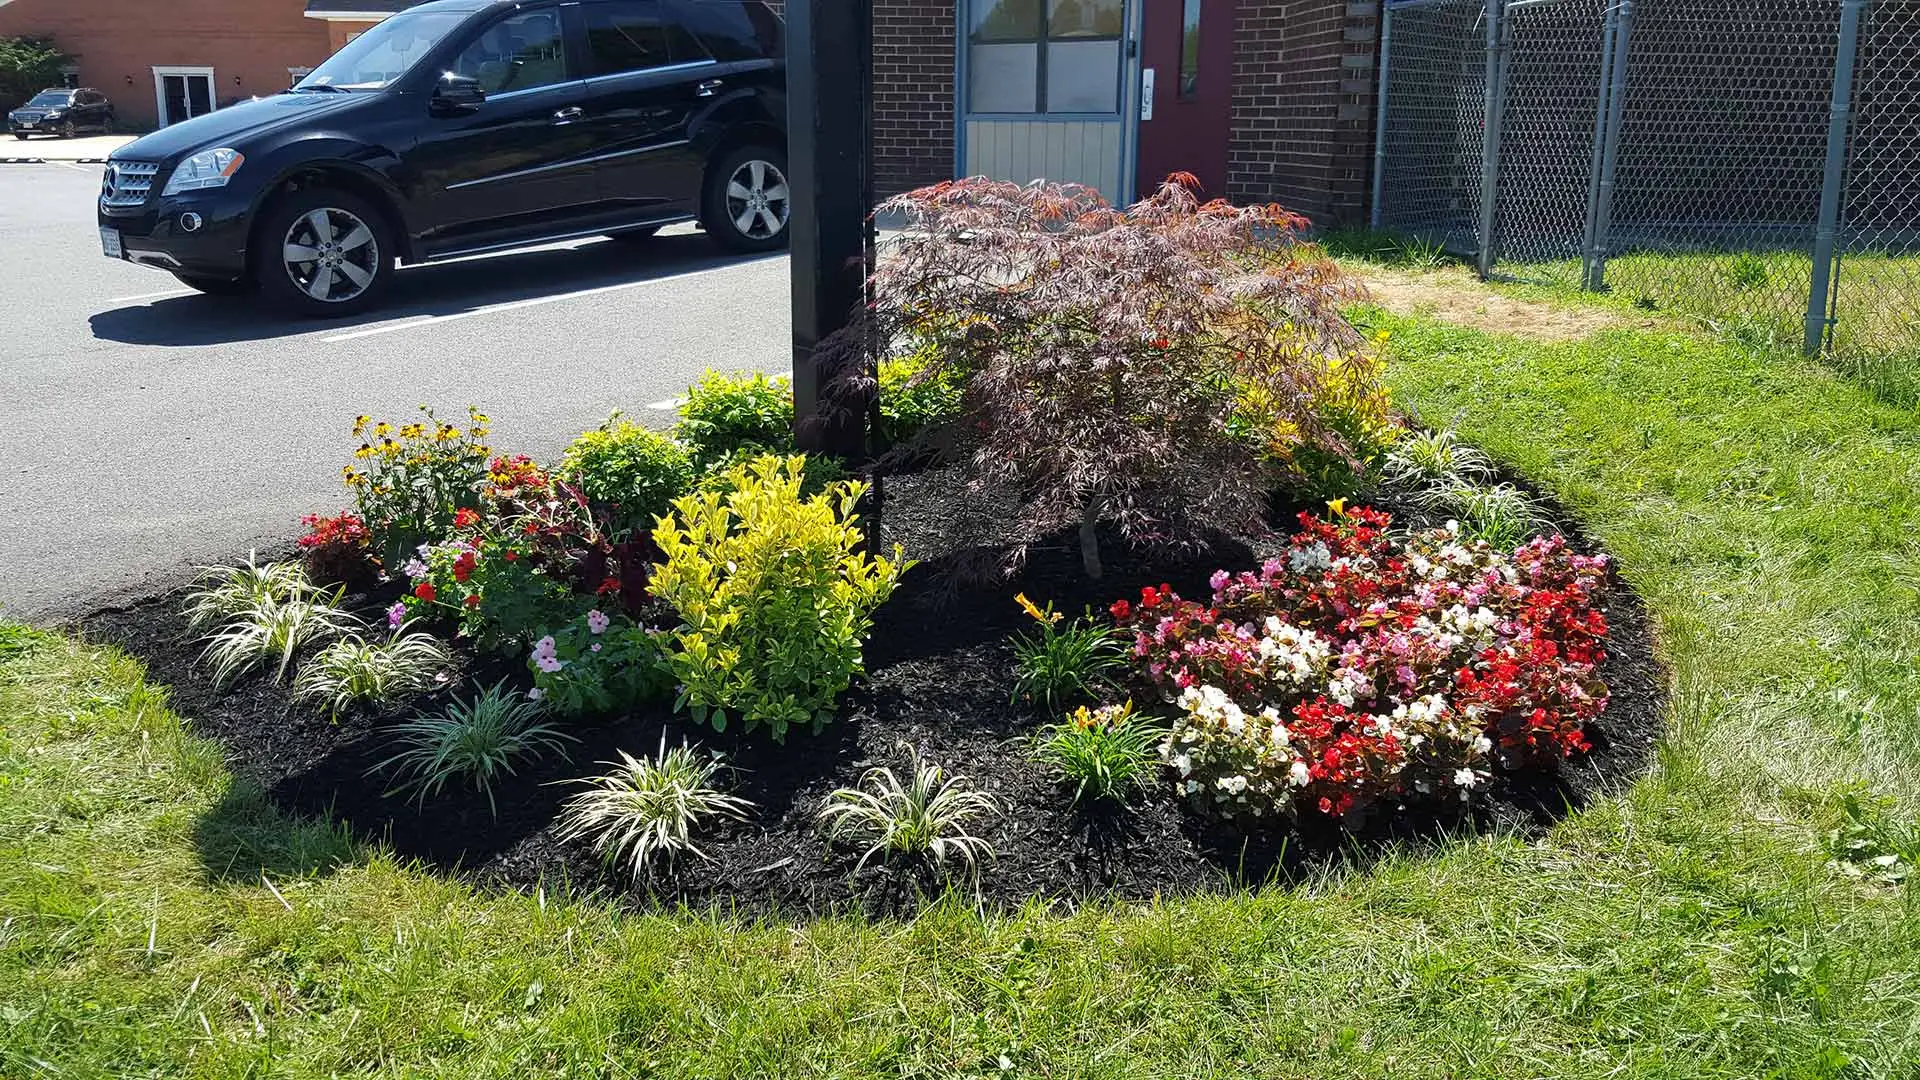 Annual flowers planted in a freshly mulched landscape bed near Bristow, VA.